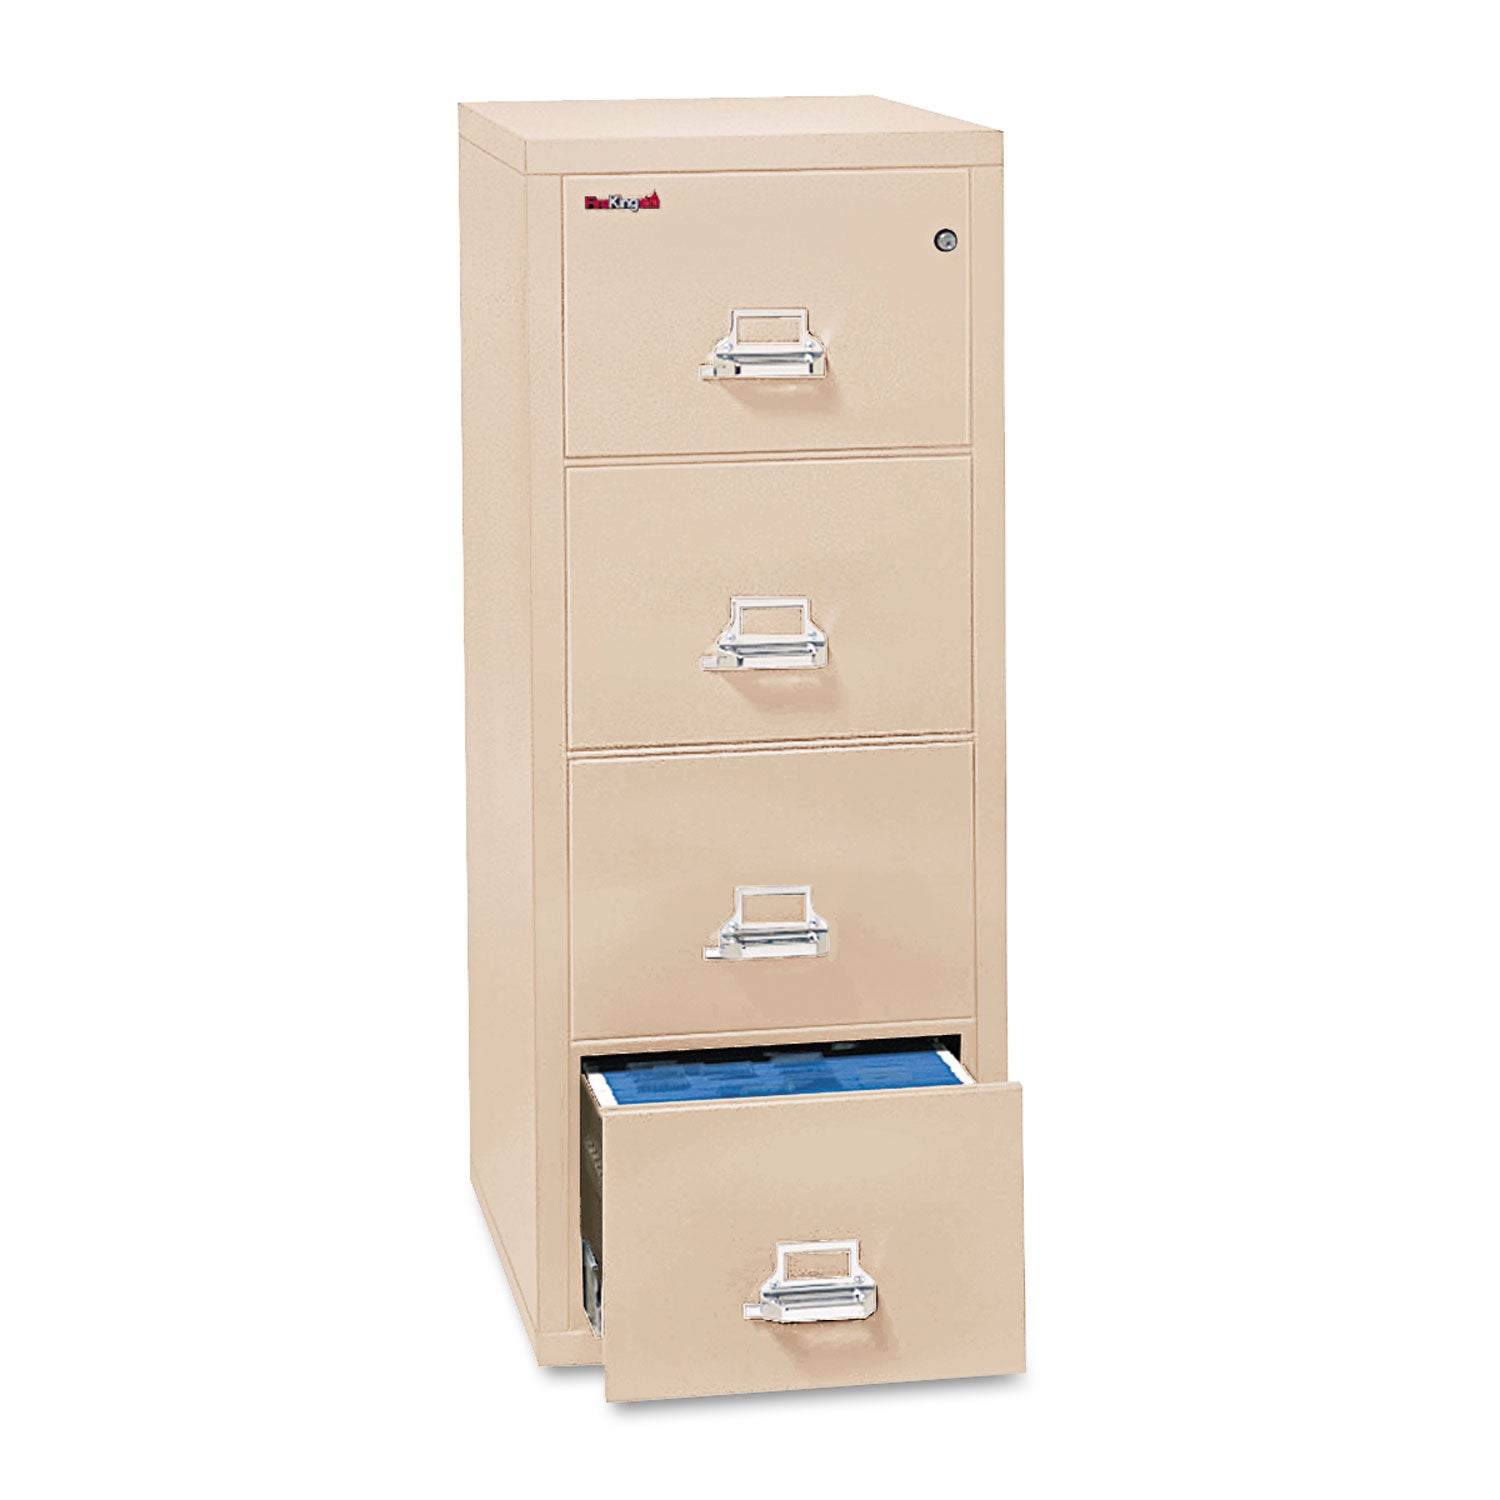 Insulated Vertical File, 1-Hour Fire Protection, 4 Letter-Size File Drawers, Parchment, 17.75" x 31.56" x 52.75 - 